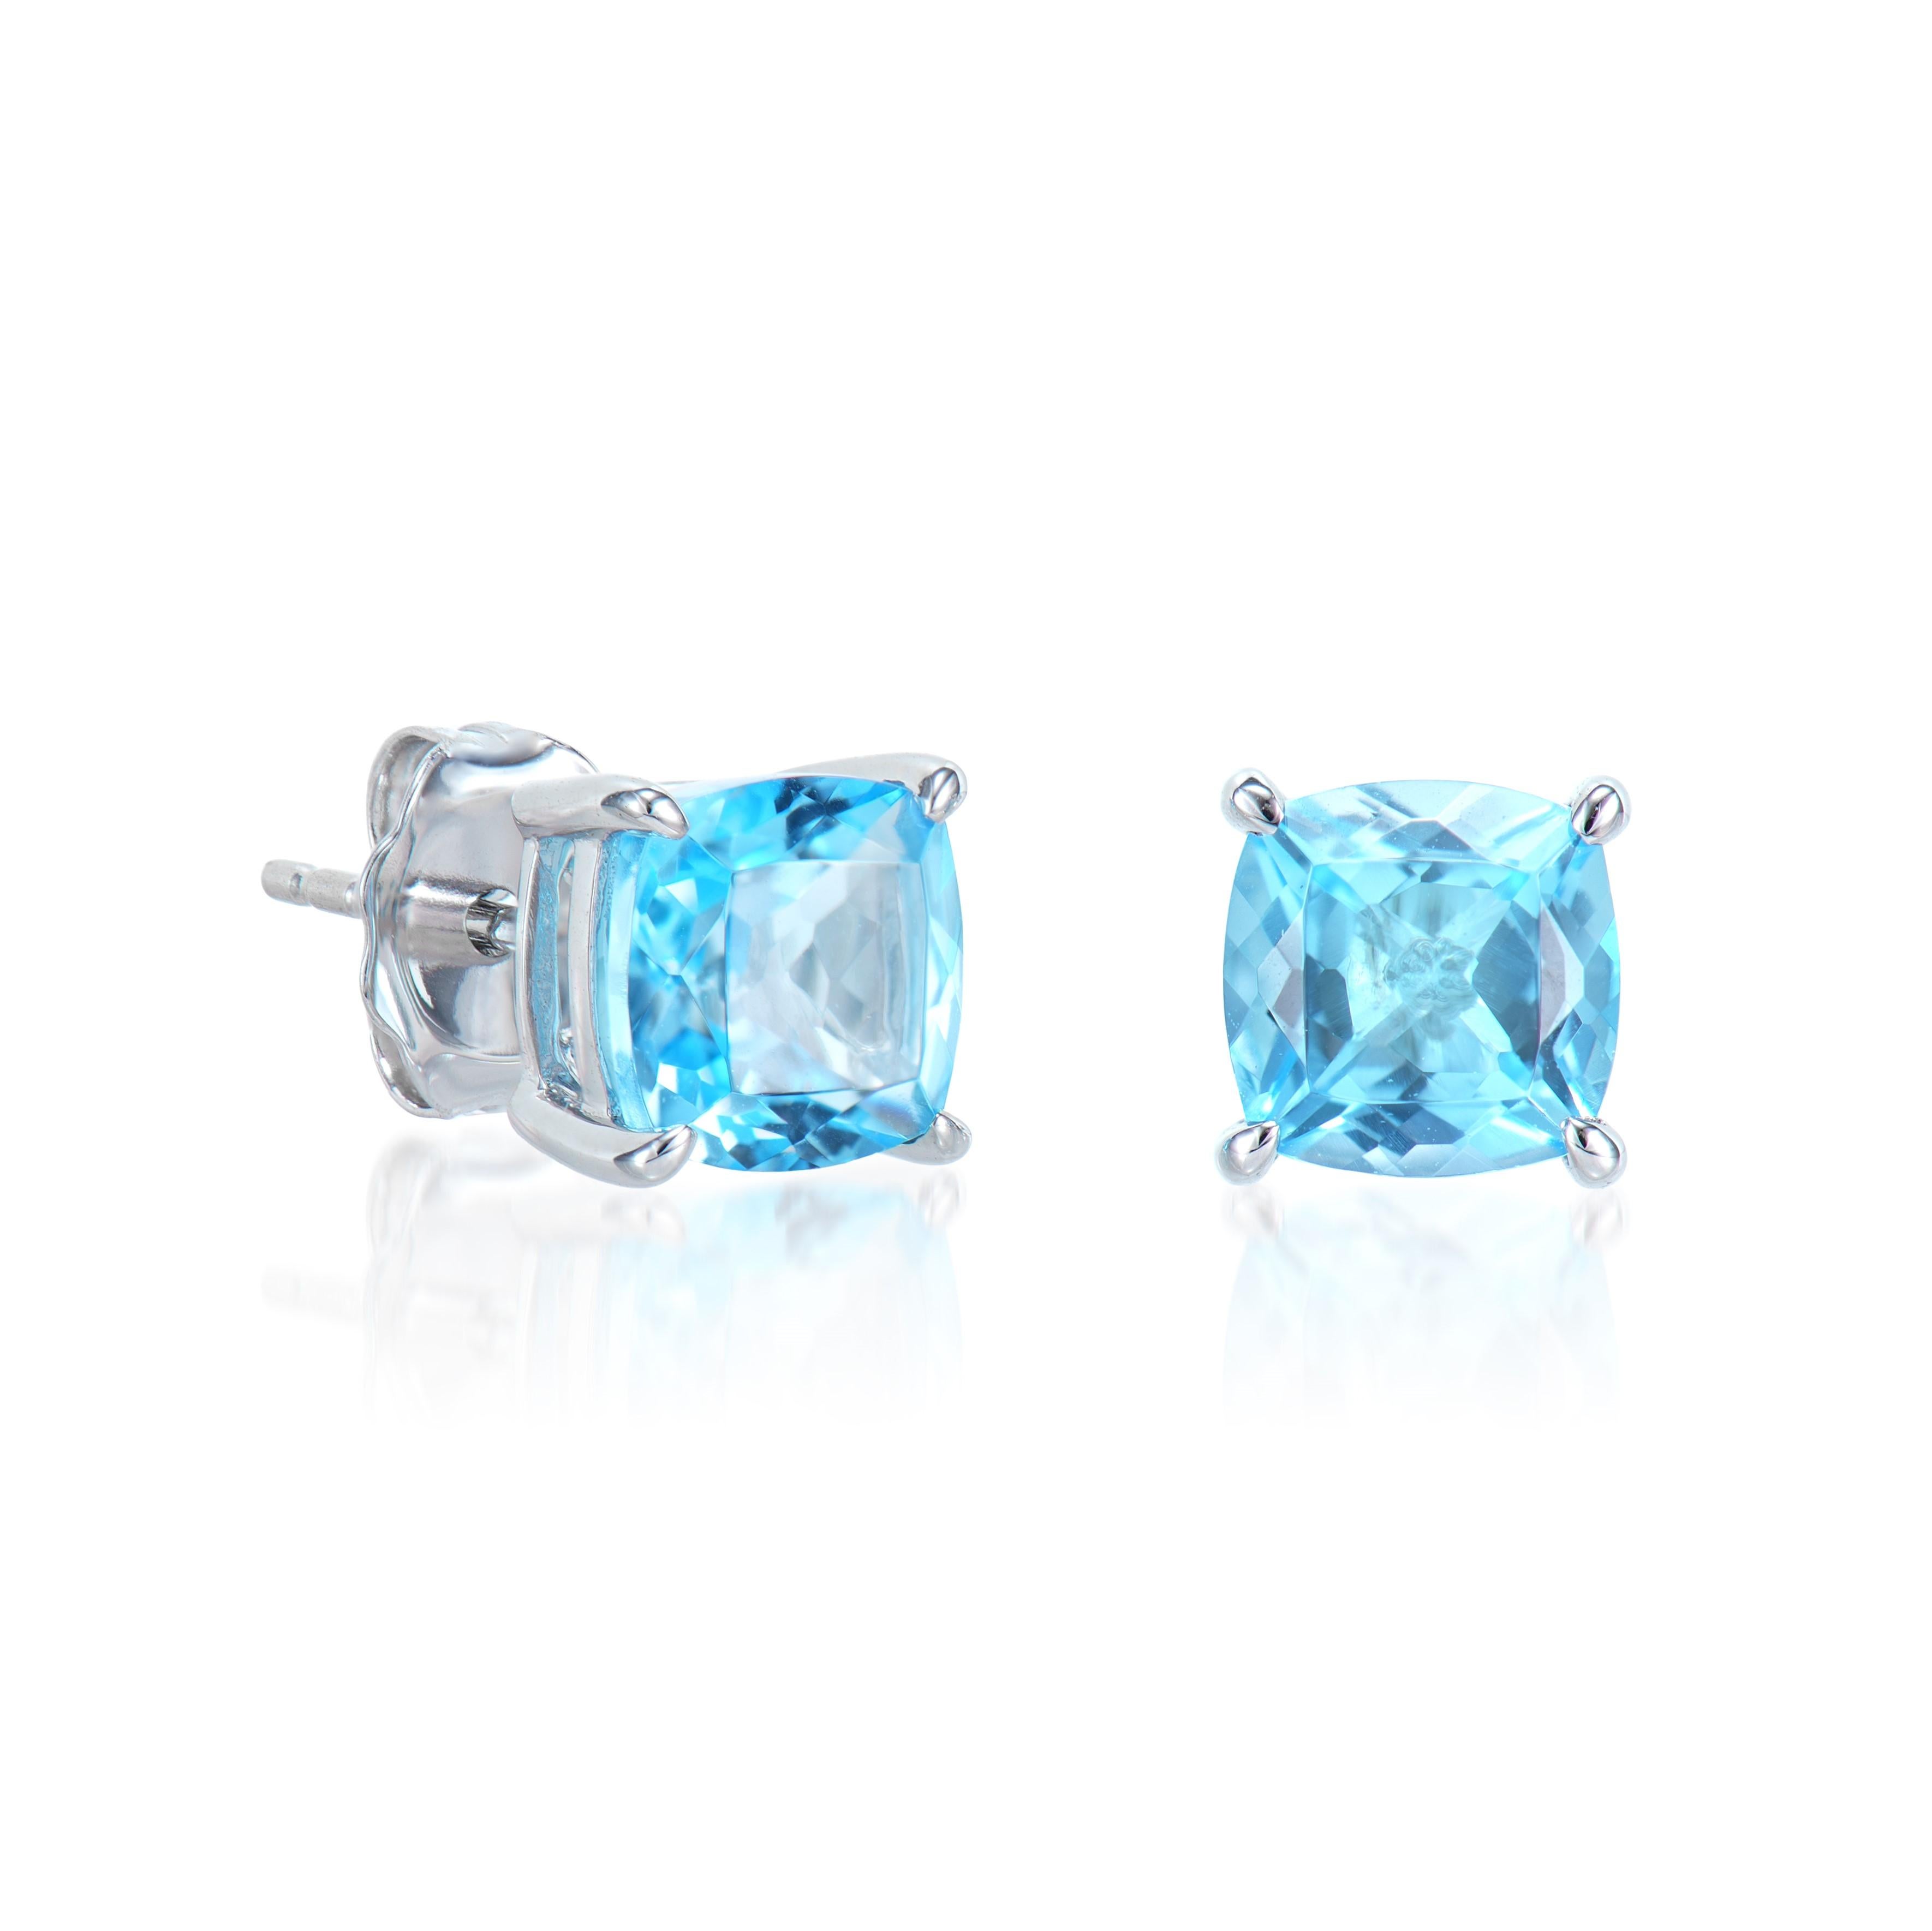 Presented A lovely collection of gems, including Amethyst, Sky Blue Topaz and Swiss Blue Topaz is perfect for people who value quality and want to wear it to any occasion or celebration. The white gold Swiss blue topaz Stud Earrings offer a classic